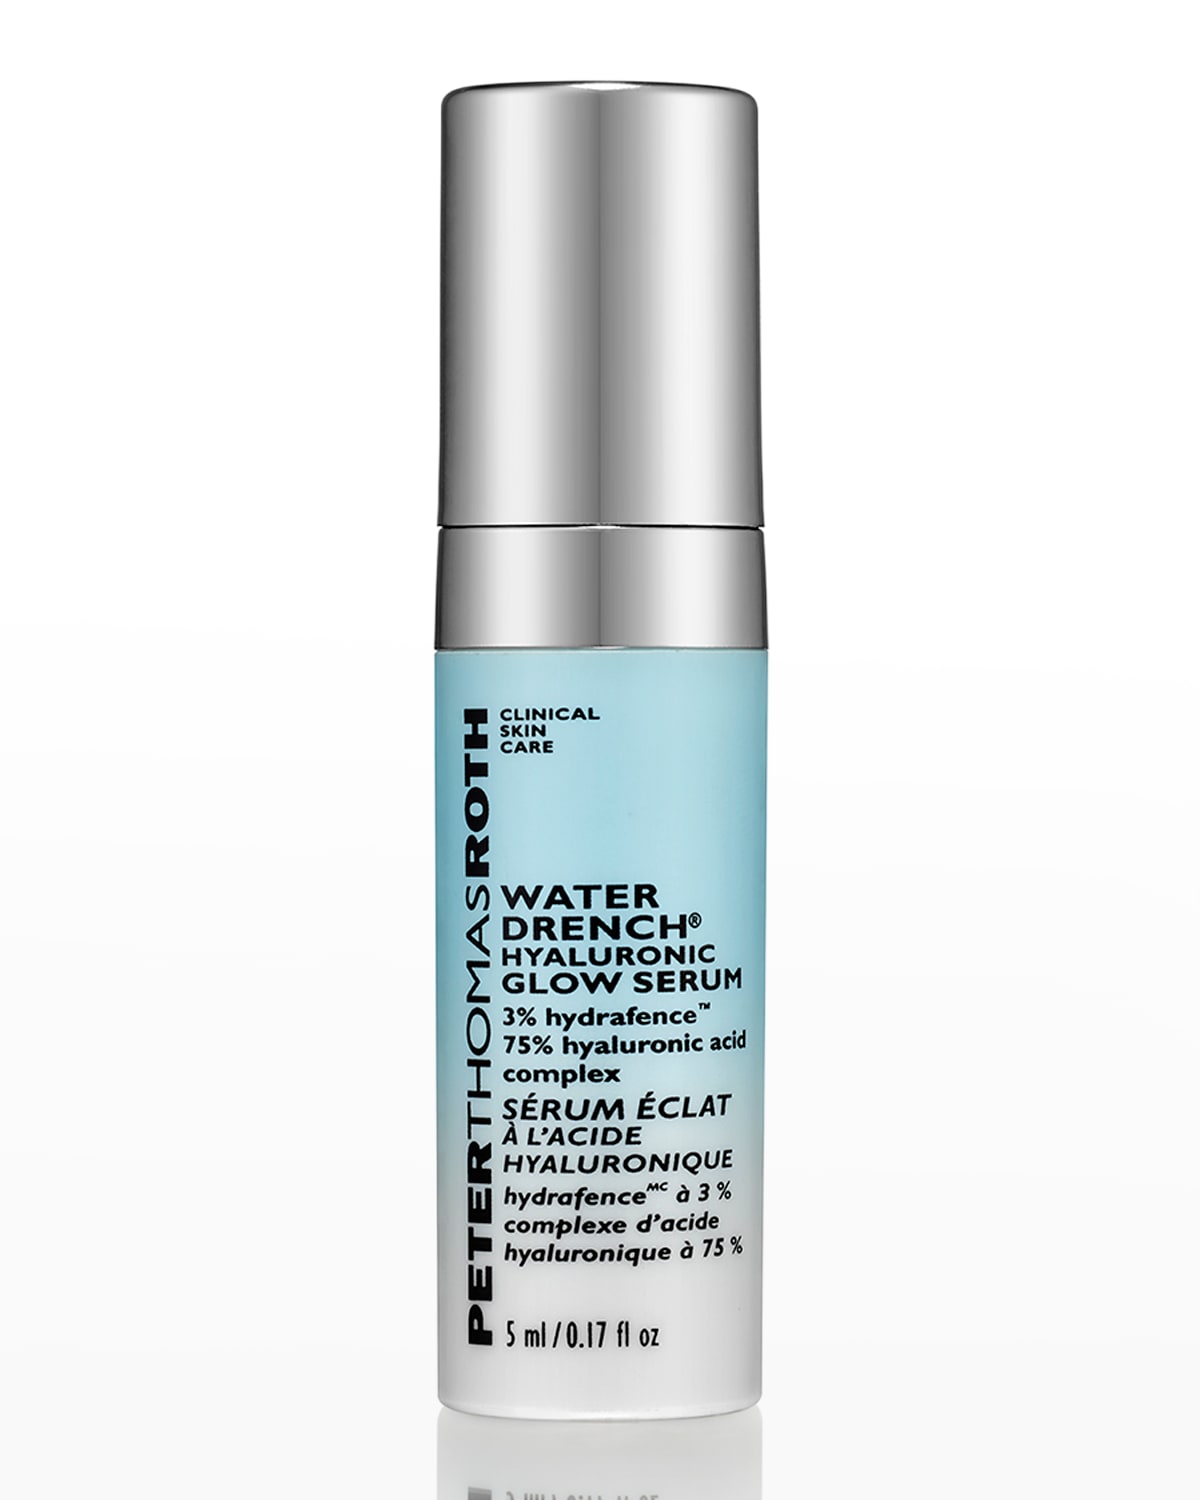 5 mL Water Drench Hyaluronic Glow Serum, Yours with any $75 Peter Thomas Roth Purchase